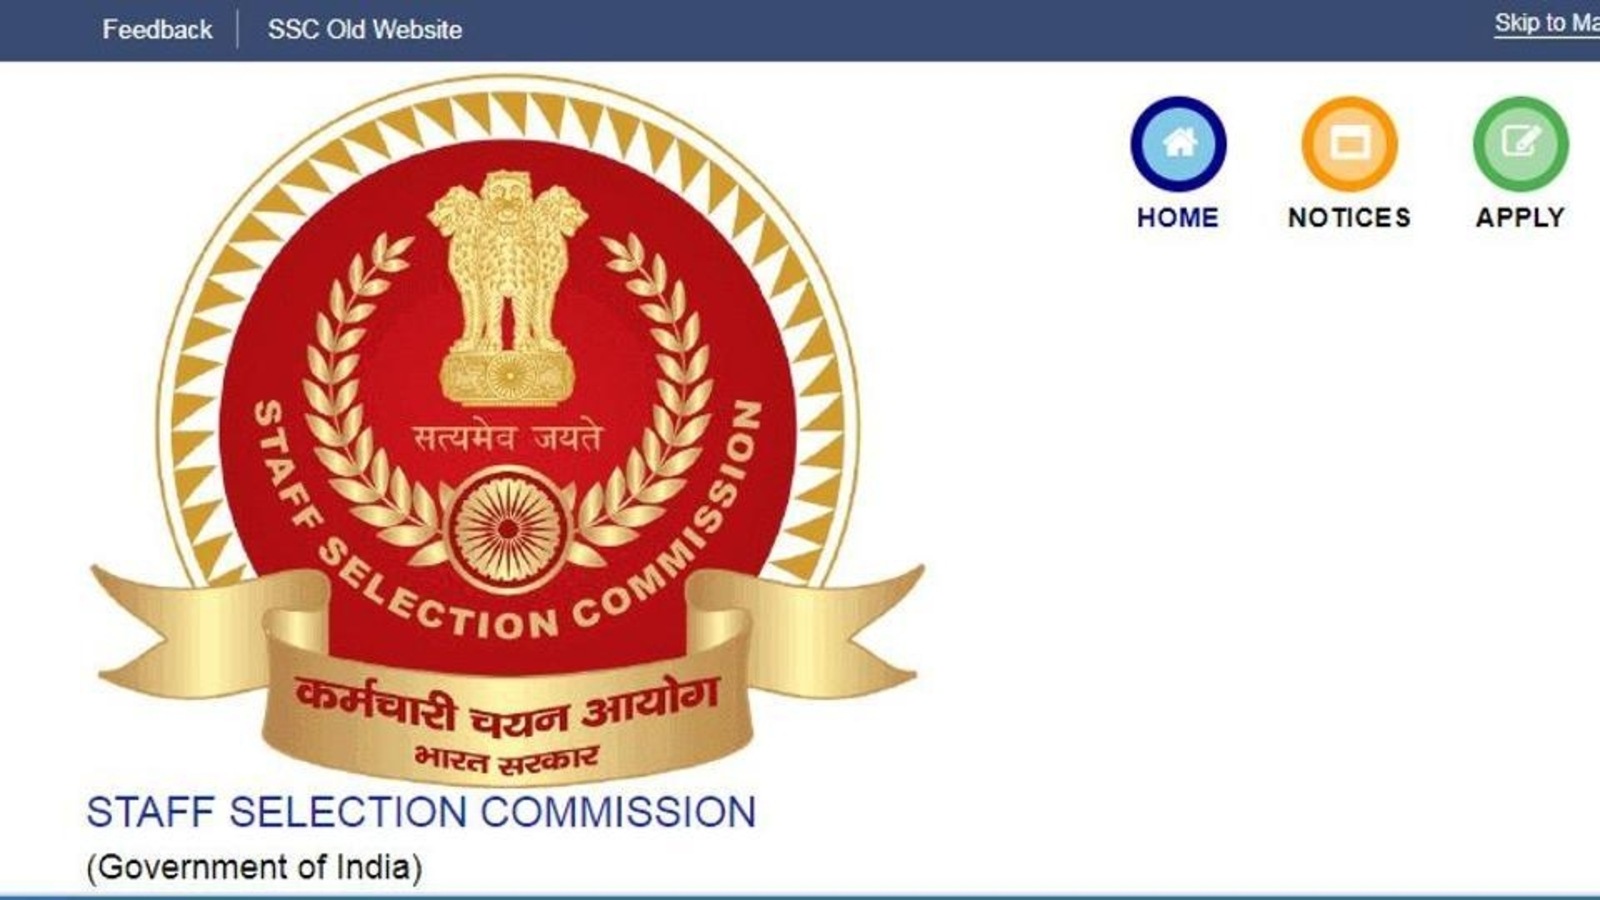 SSC Exams 2022: CHSL, Head Constable, MTS exam dates released, check here